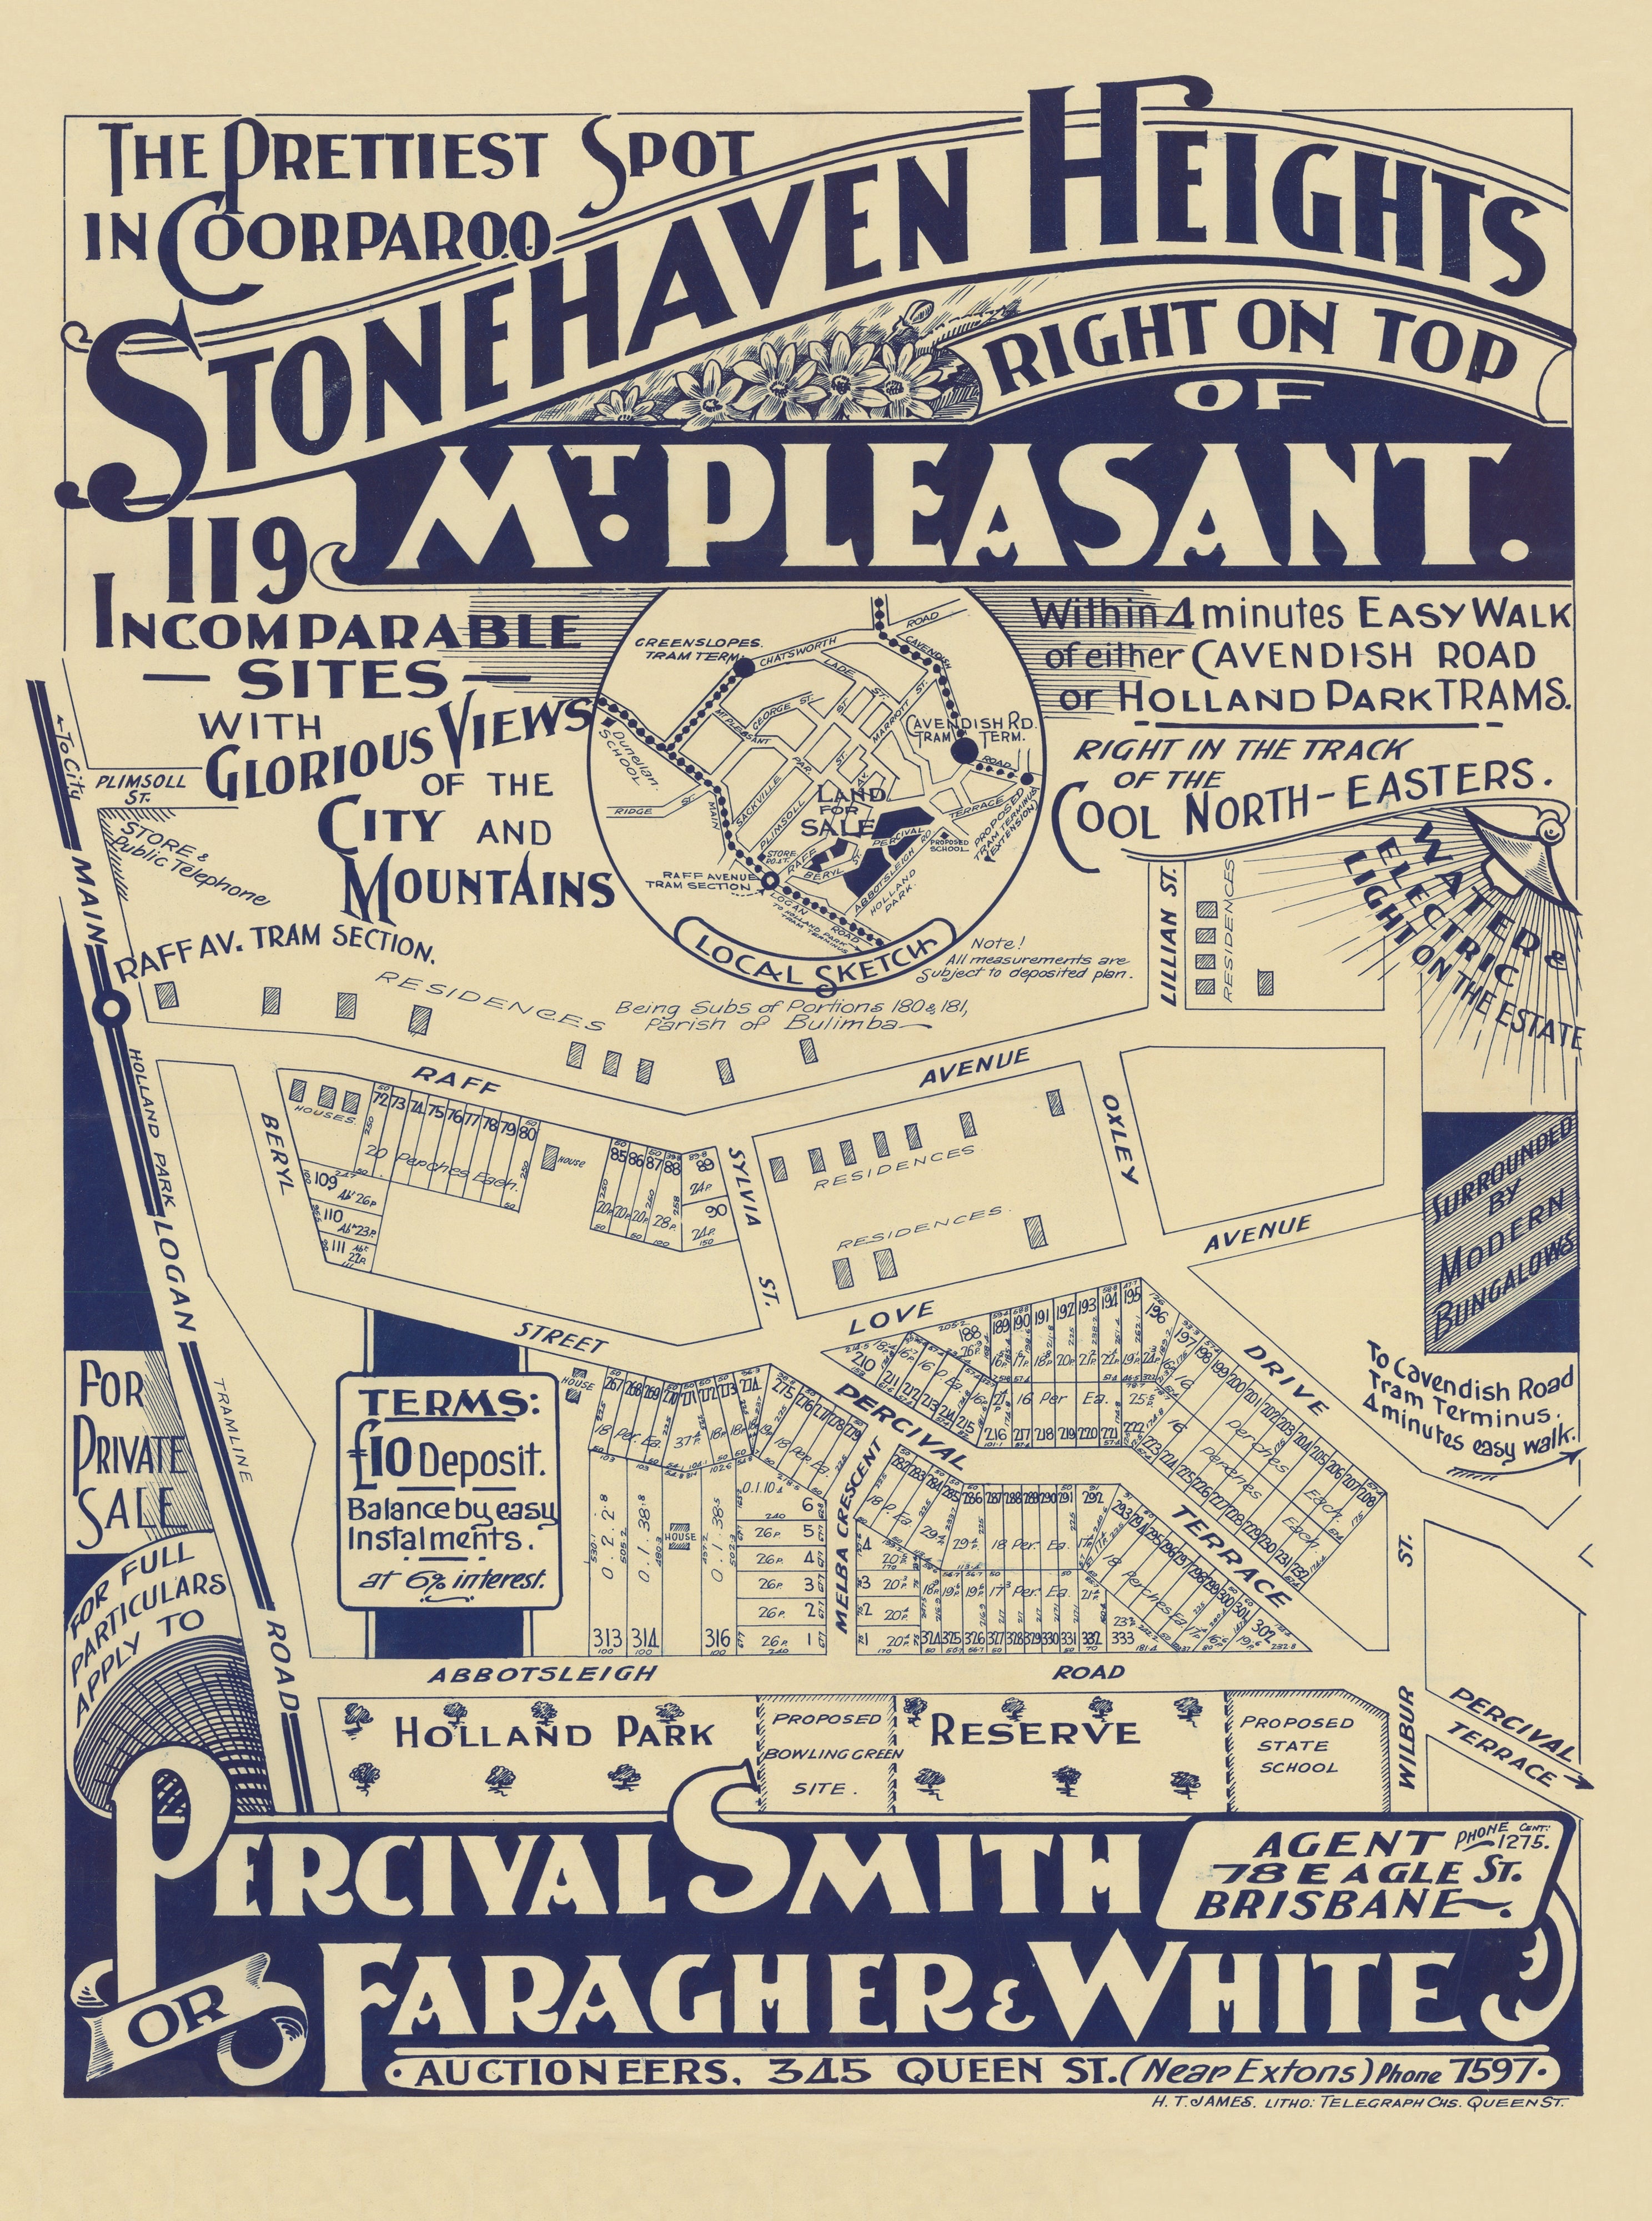 1931 Holland Park - Stonehaven Heights